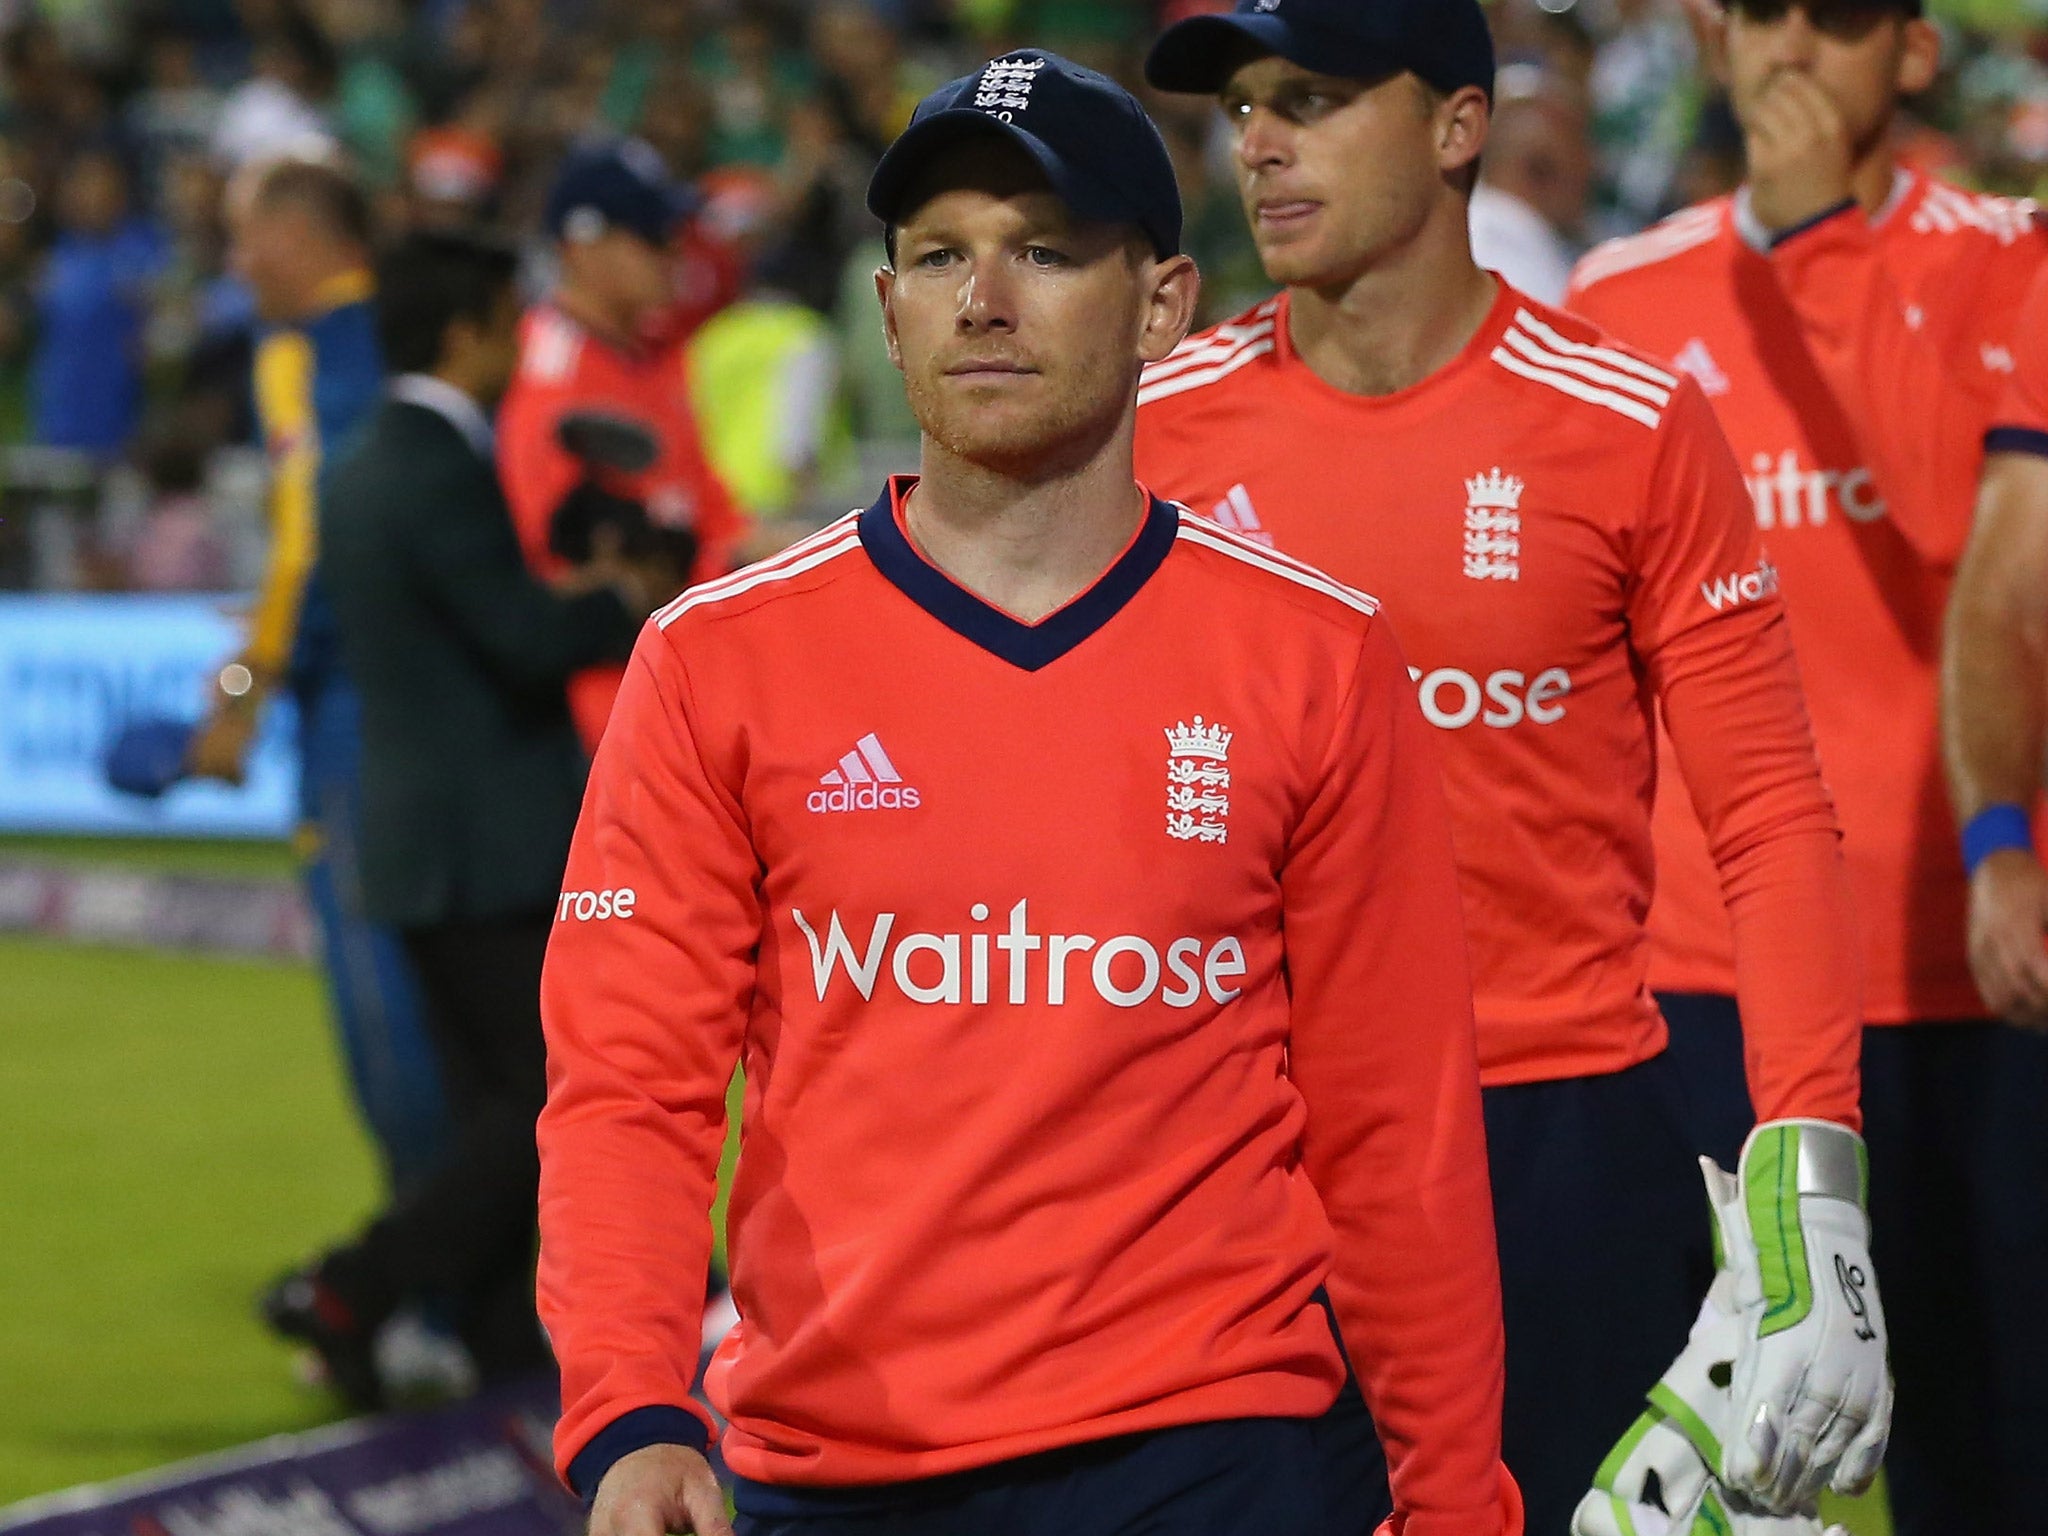 Eoin Morgan is not expected to feature on England's tour of Bangladesh due to security and safety concerns